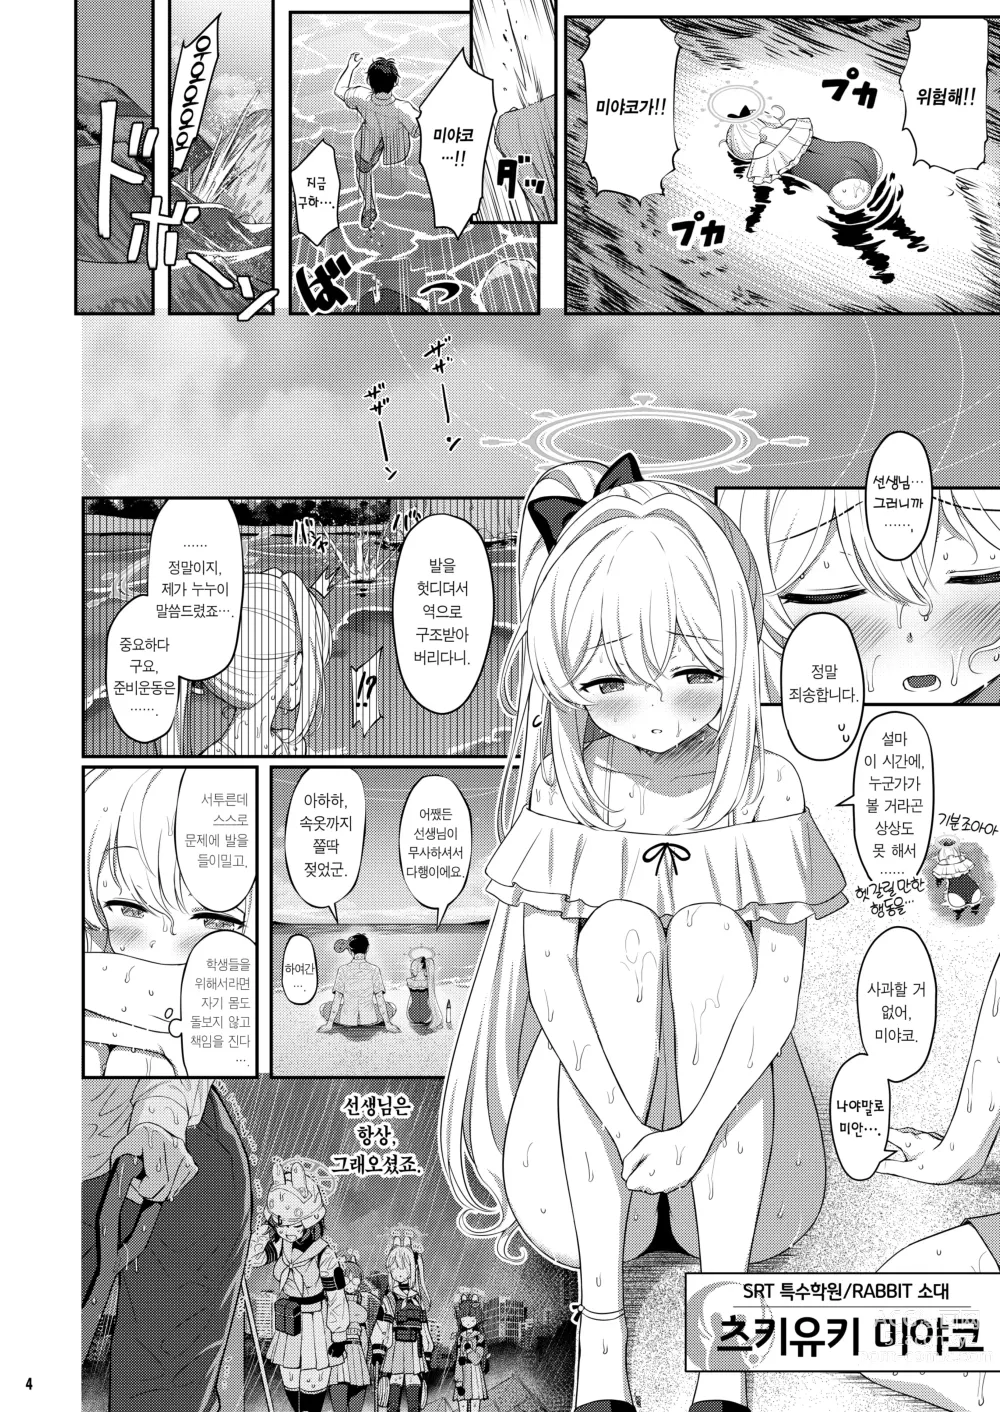 Page 3 of doujinshi 러브 잇 원